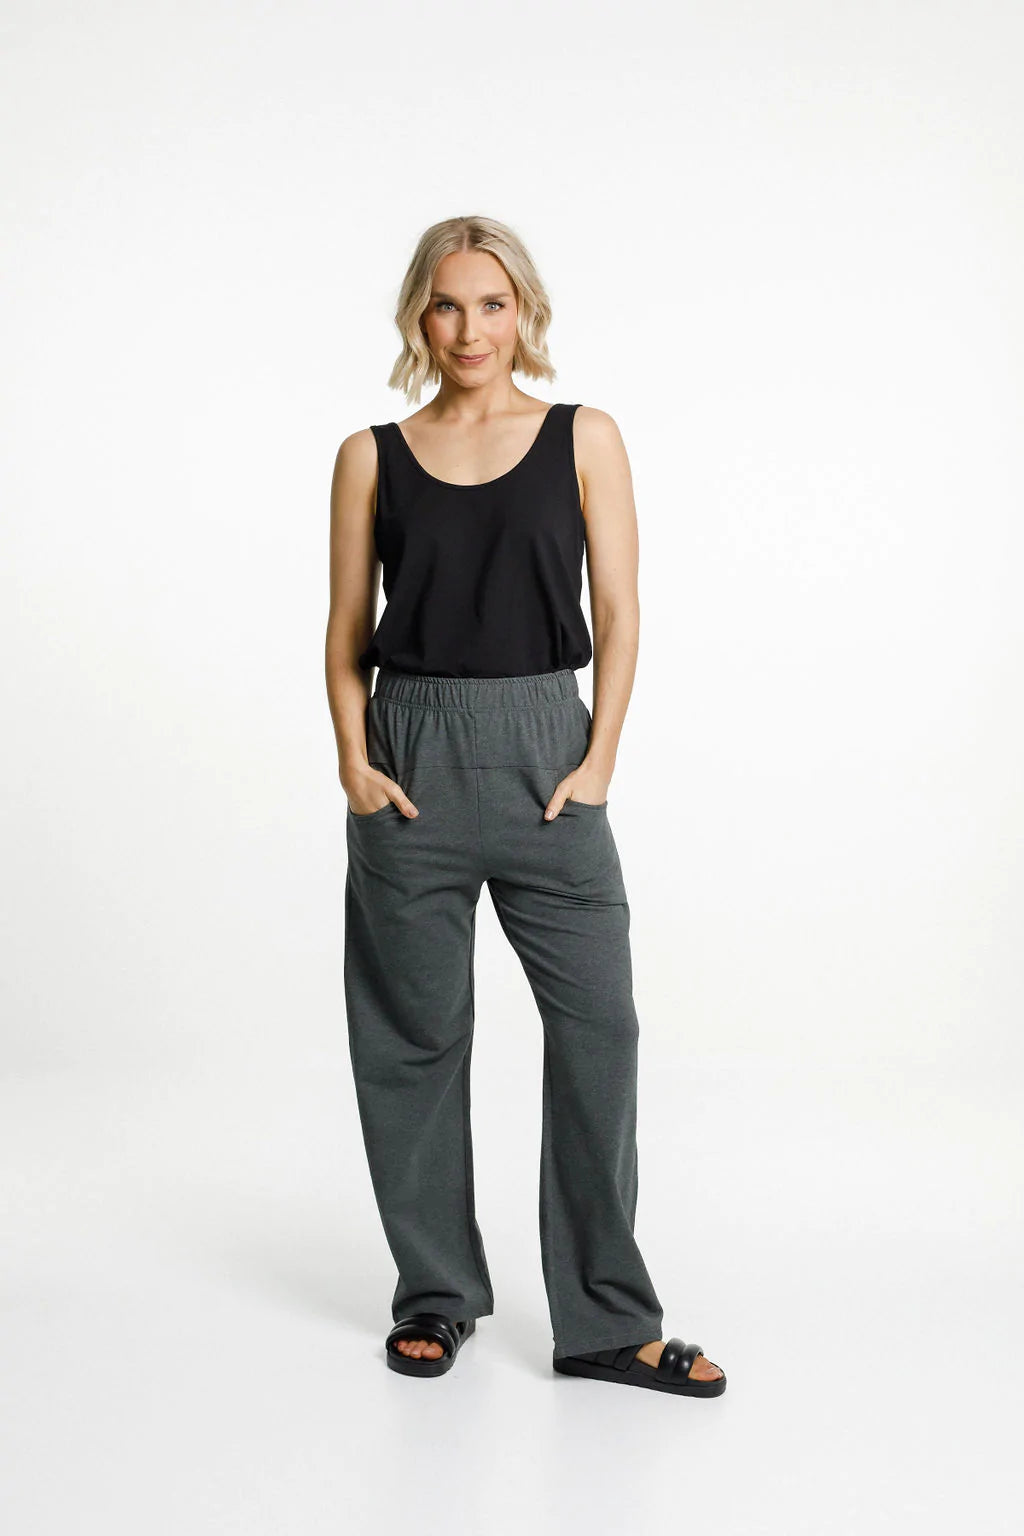 Home Lee Avenue Pants -WINTER - Charcoal with Matte Black X – Style358